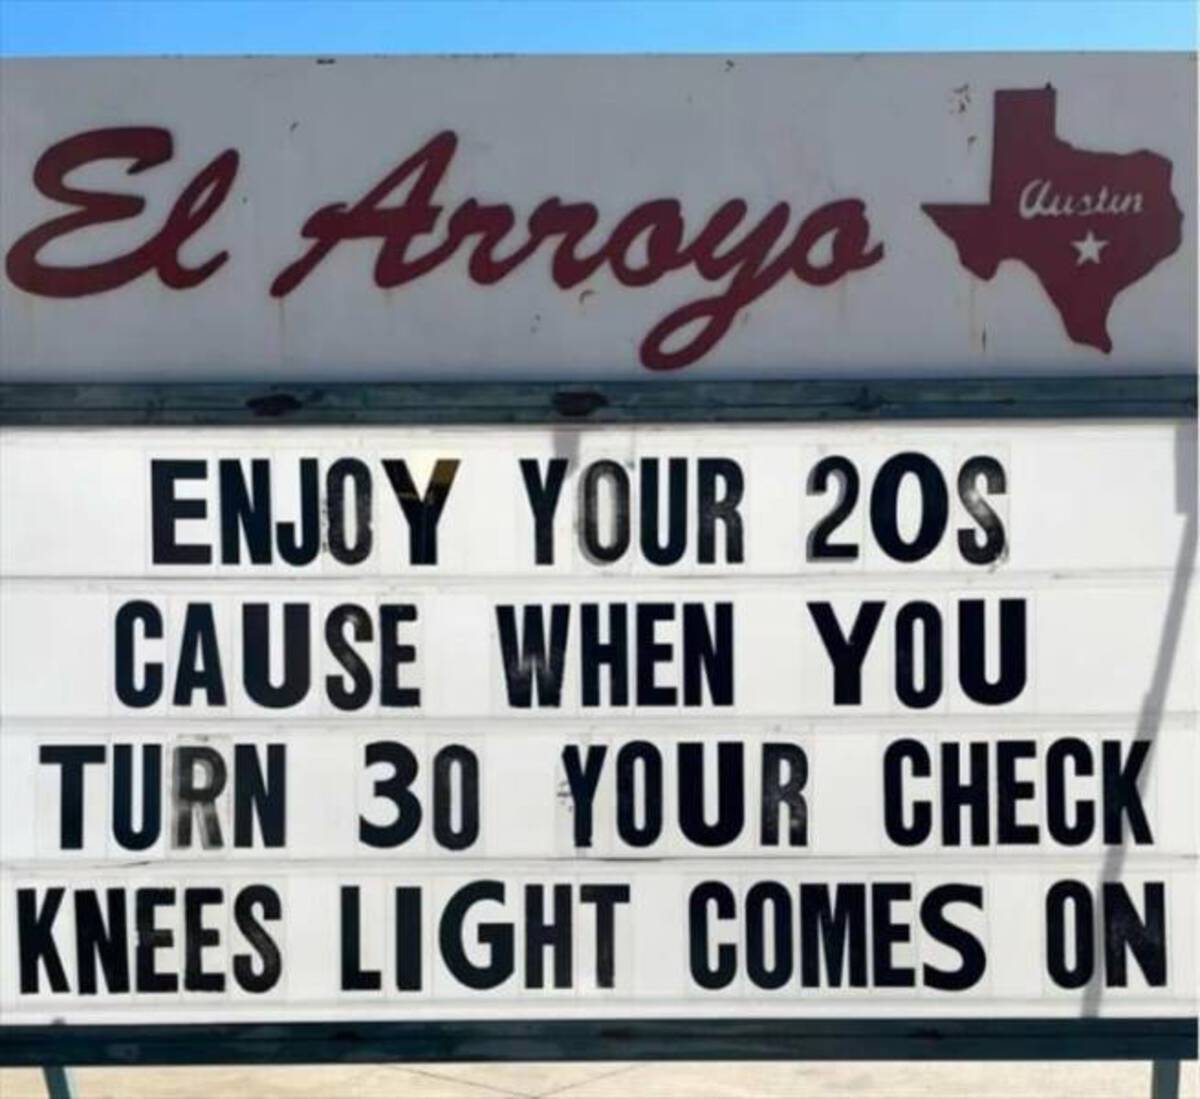 signage - El Arroyo Austin Enjoy Your 20S Cause When You Turn 30 Your Check Knees Light Comes On